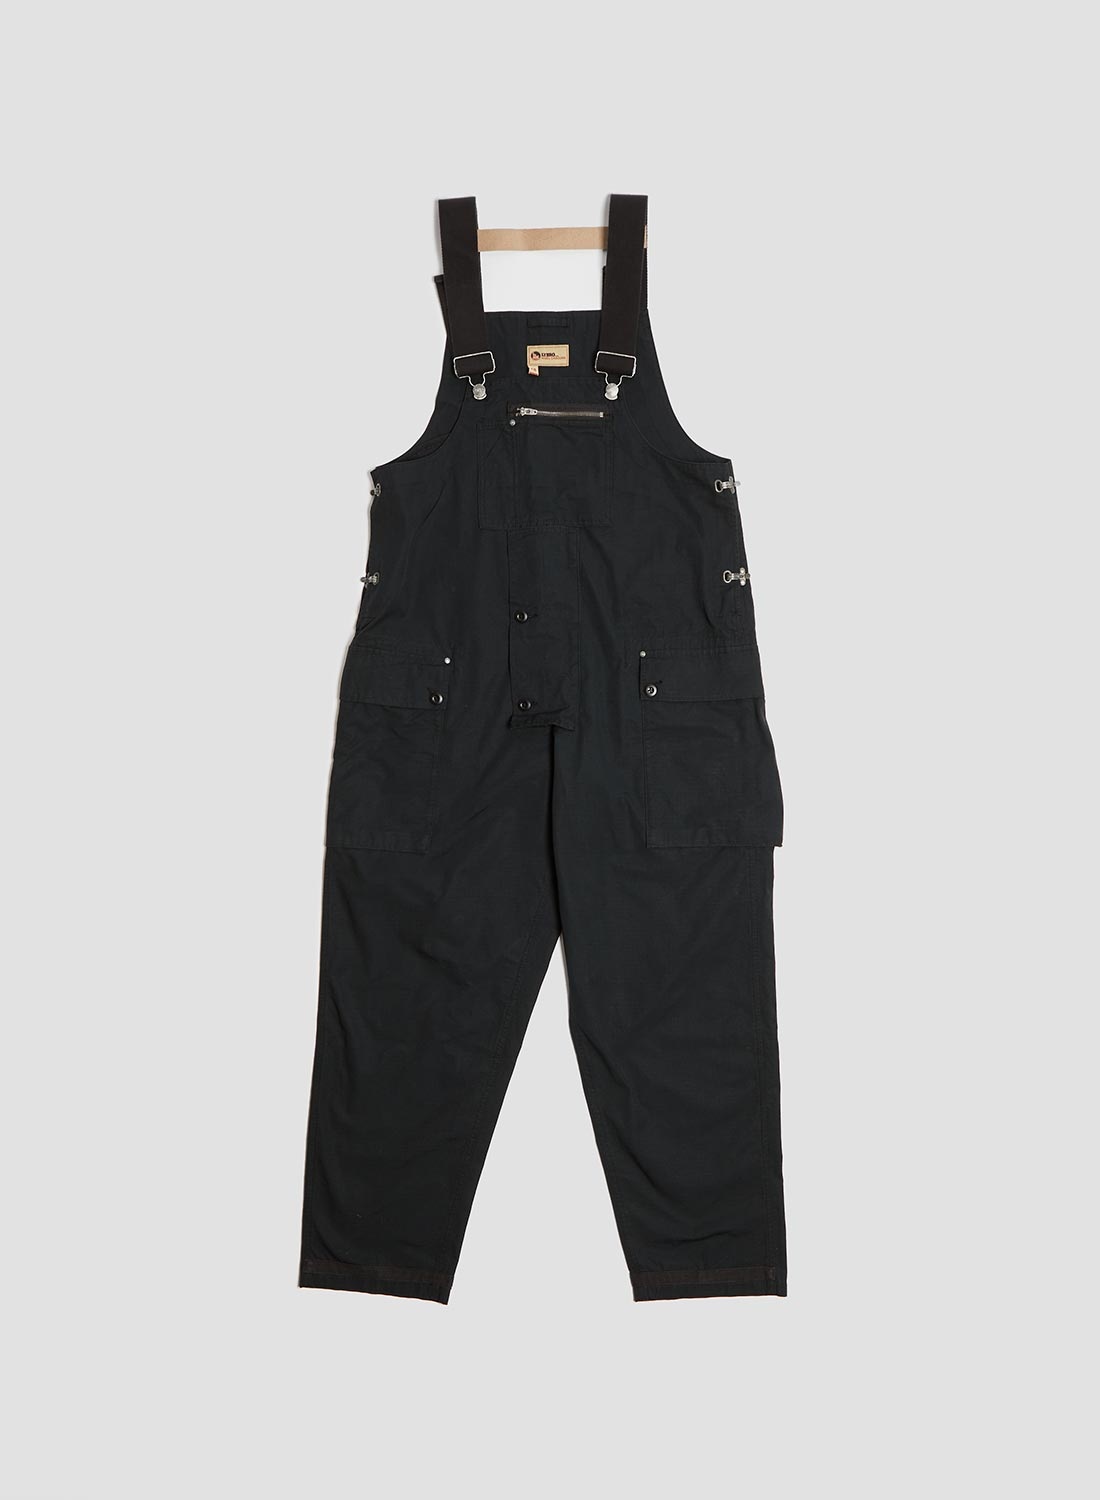 Naval Dungaree in Black (Cotton Ripstop) - 1